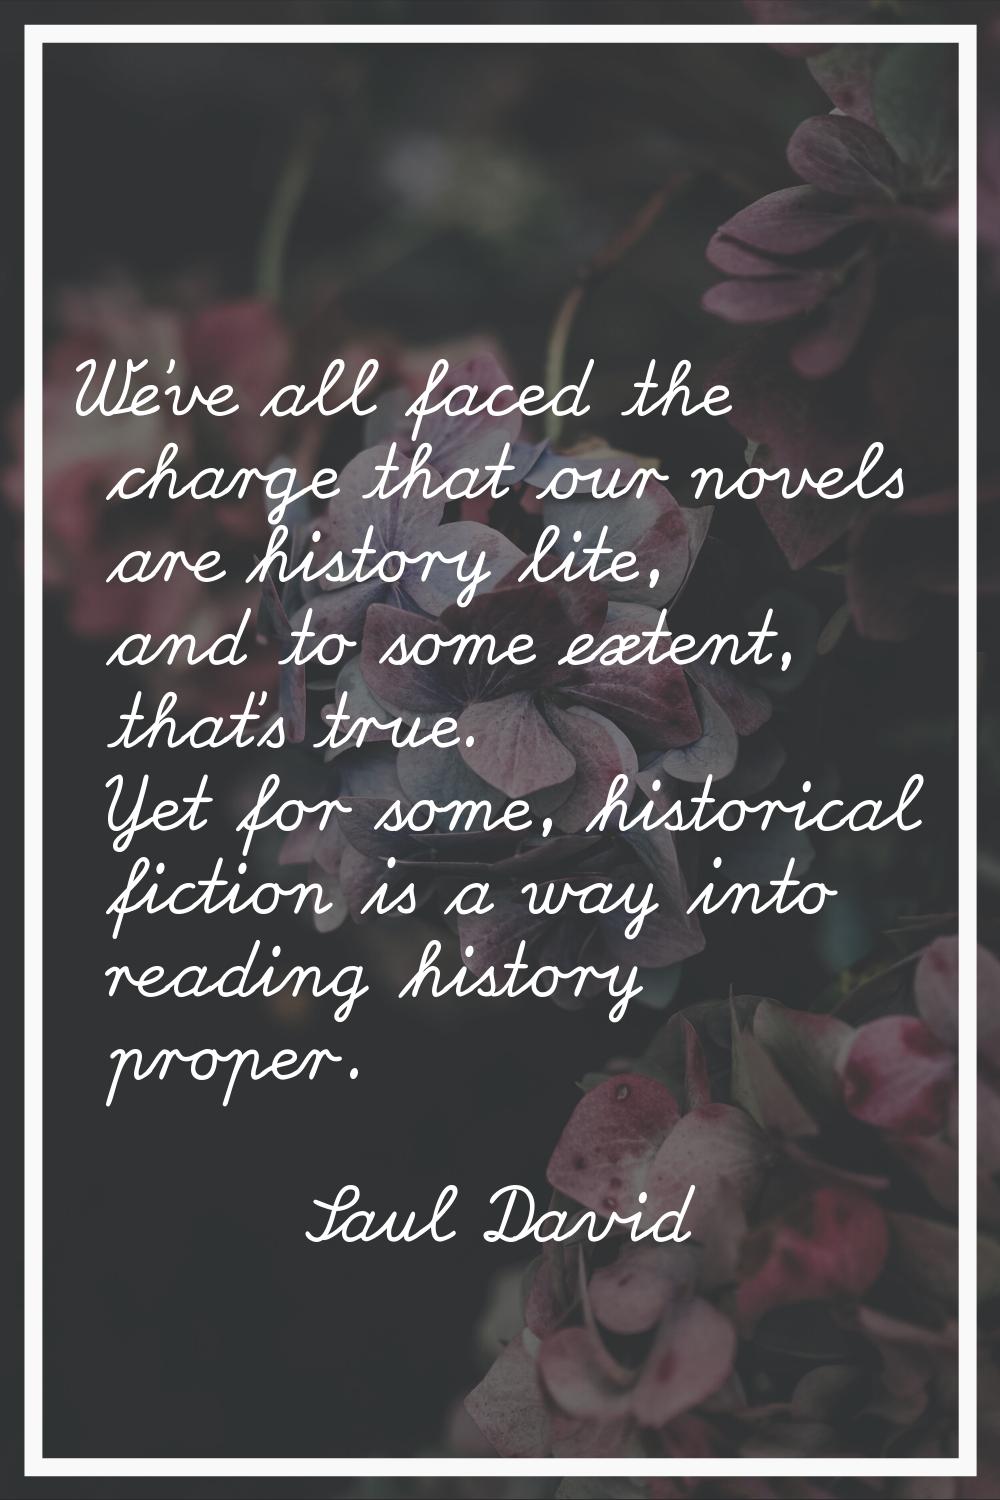 We've all faced the charge that our novels are history lite, and to some extent, that's true. Yet f